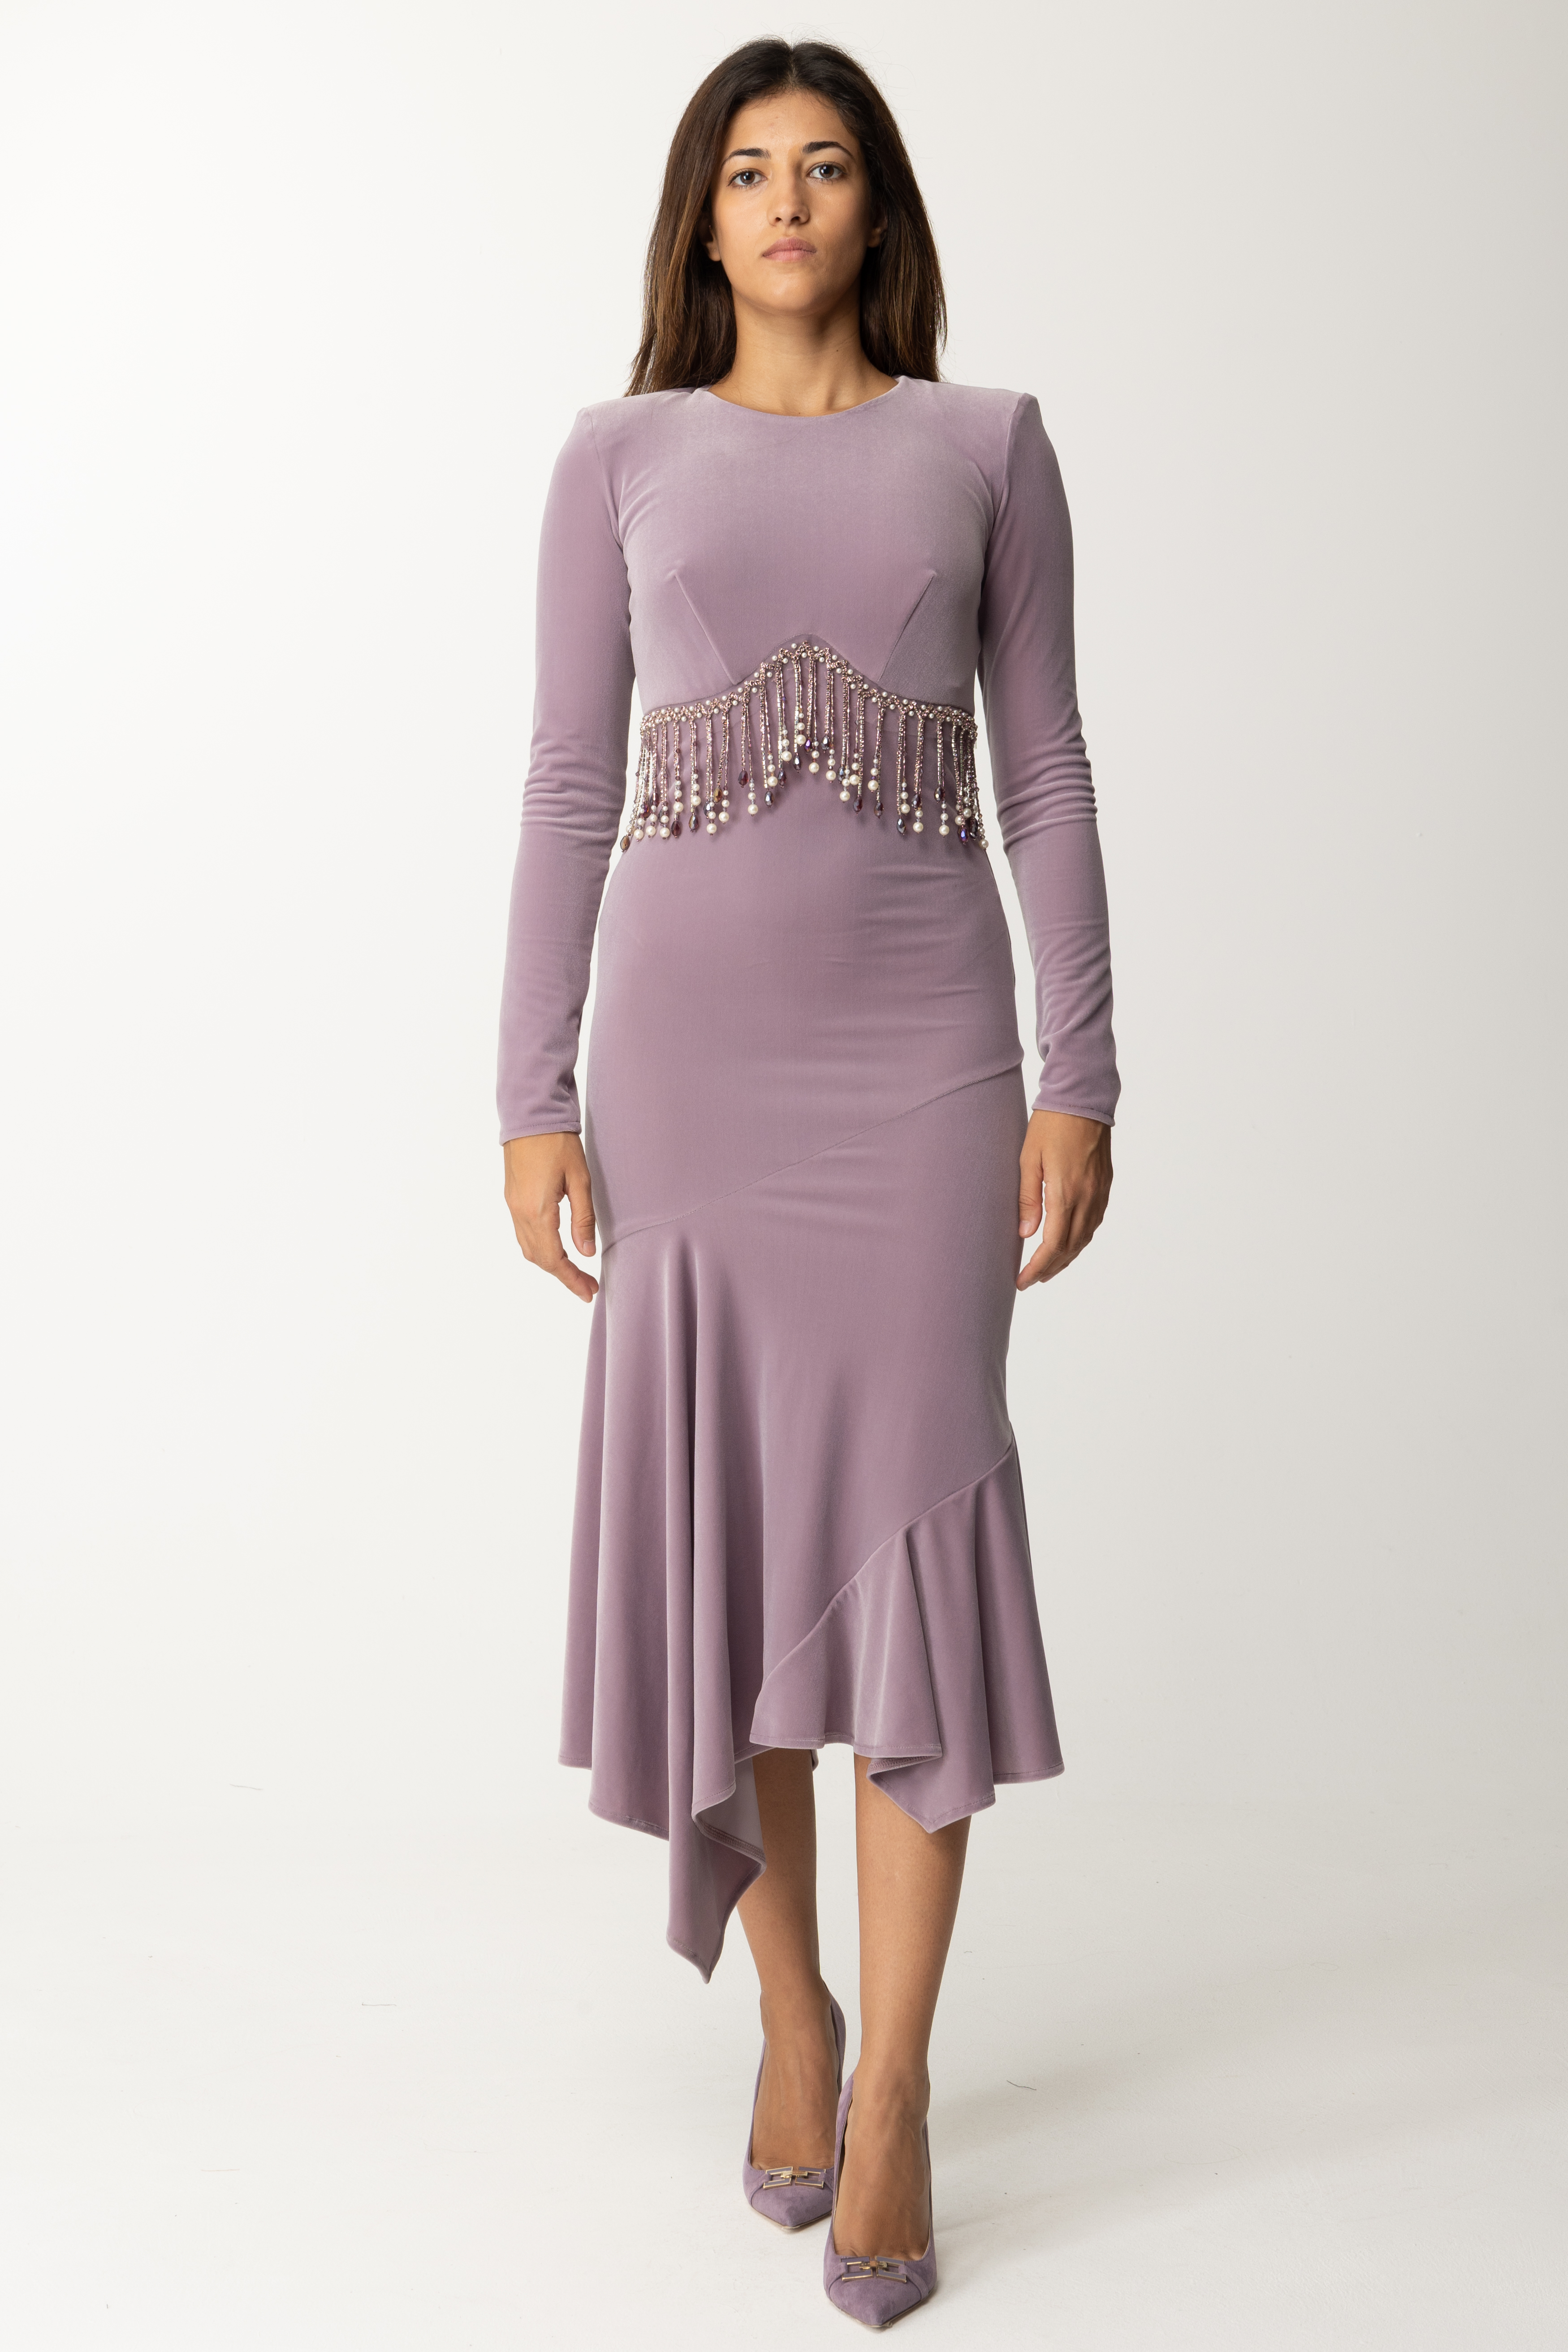 Preview: Elisabetta Franchi Velvet Midi Dress with Pearl Embroidery CANDY VIOLET